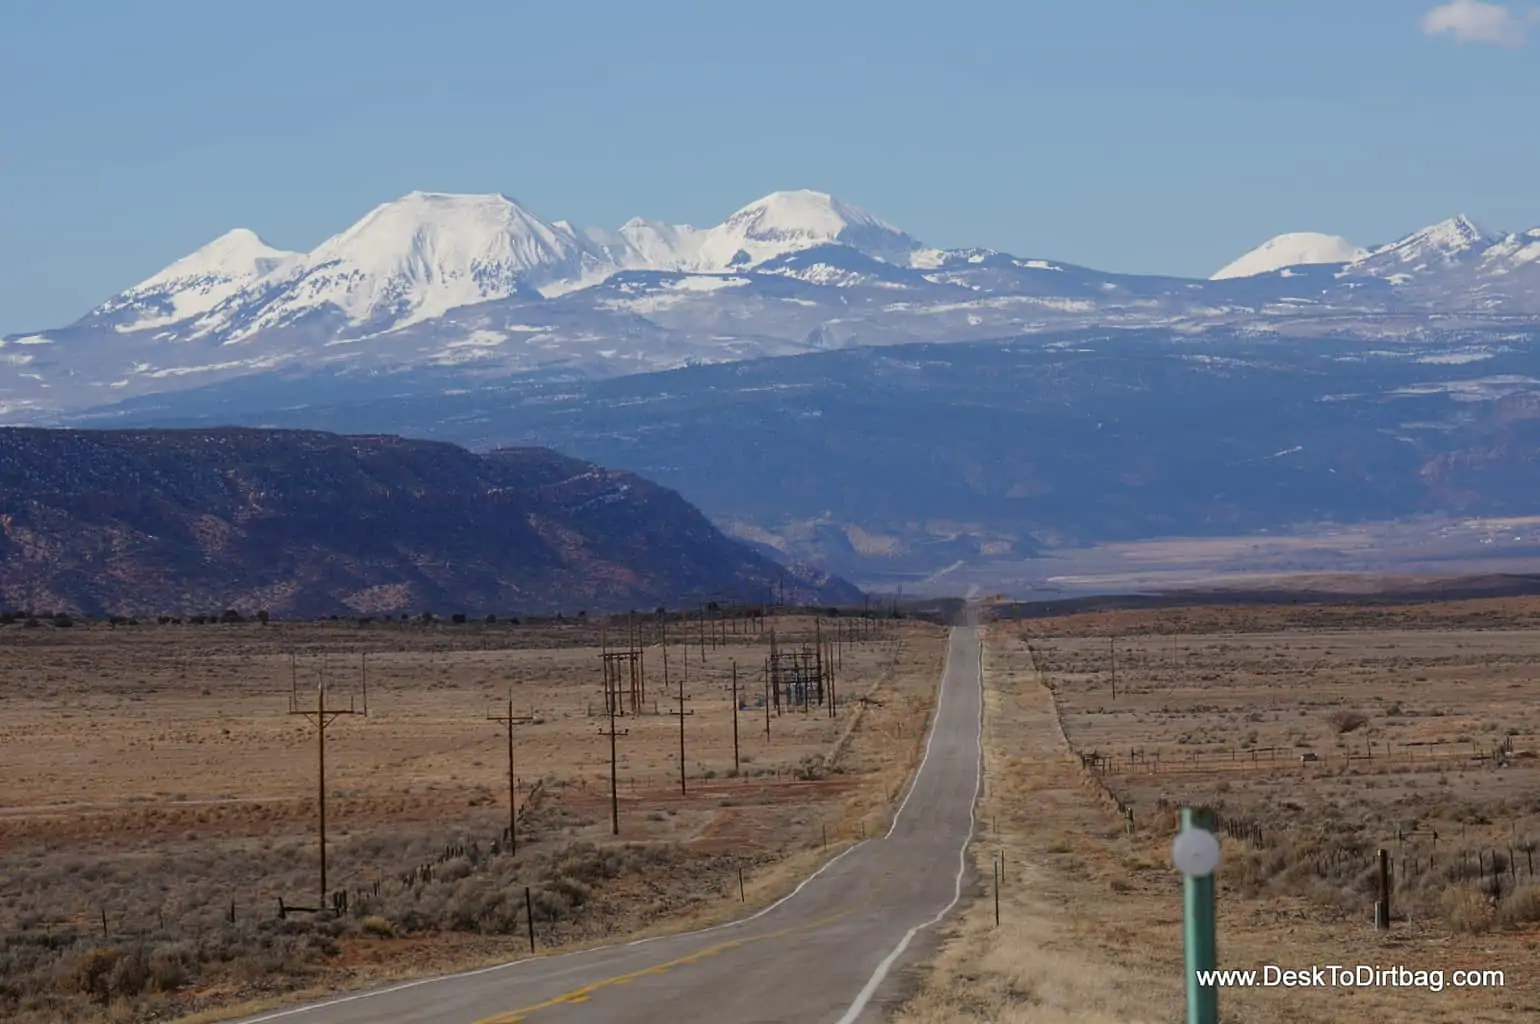 The La Sal Mountains of Utah as seen on the drive from Colorado.